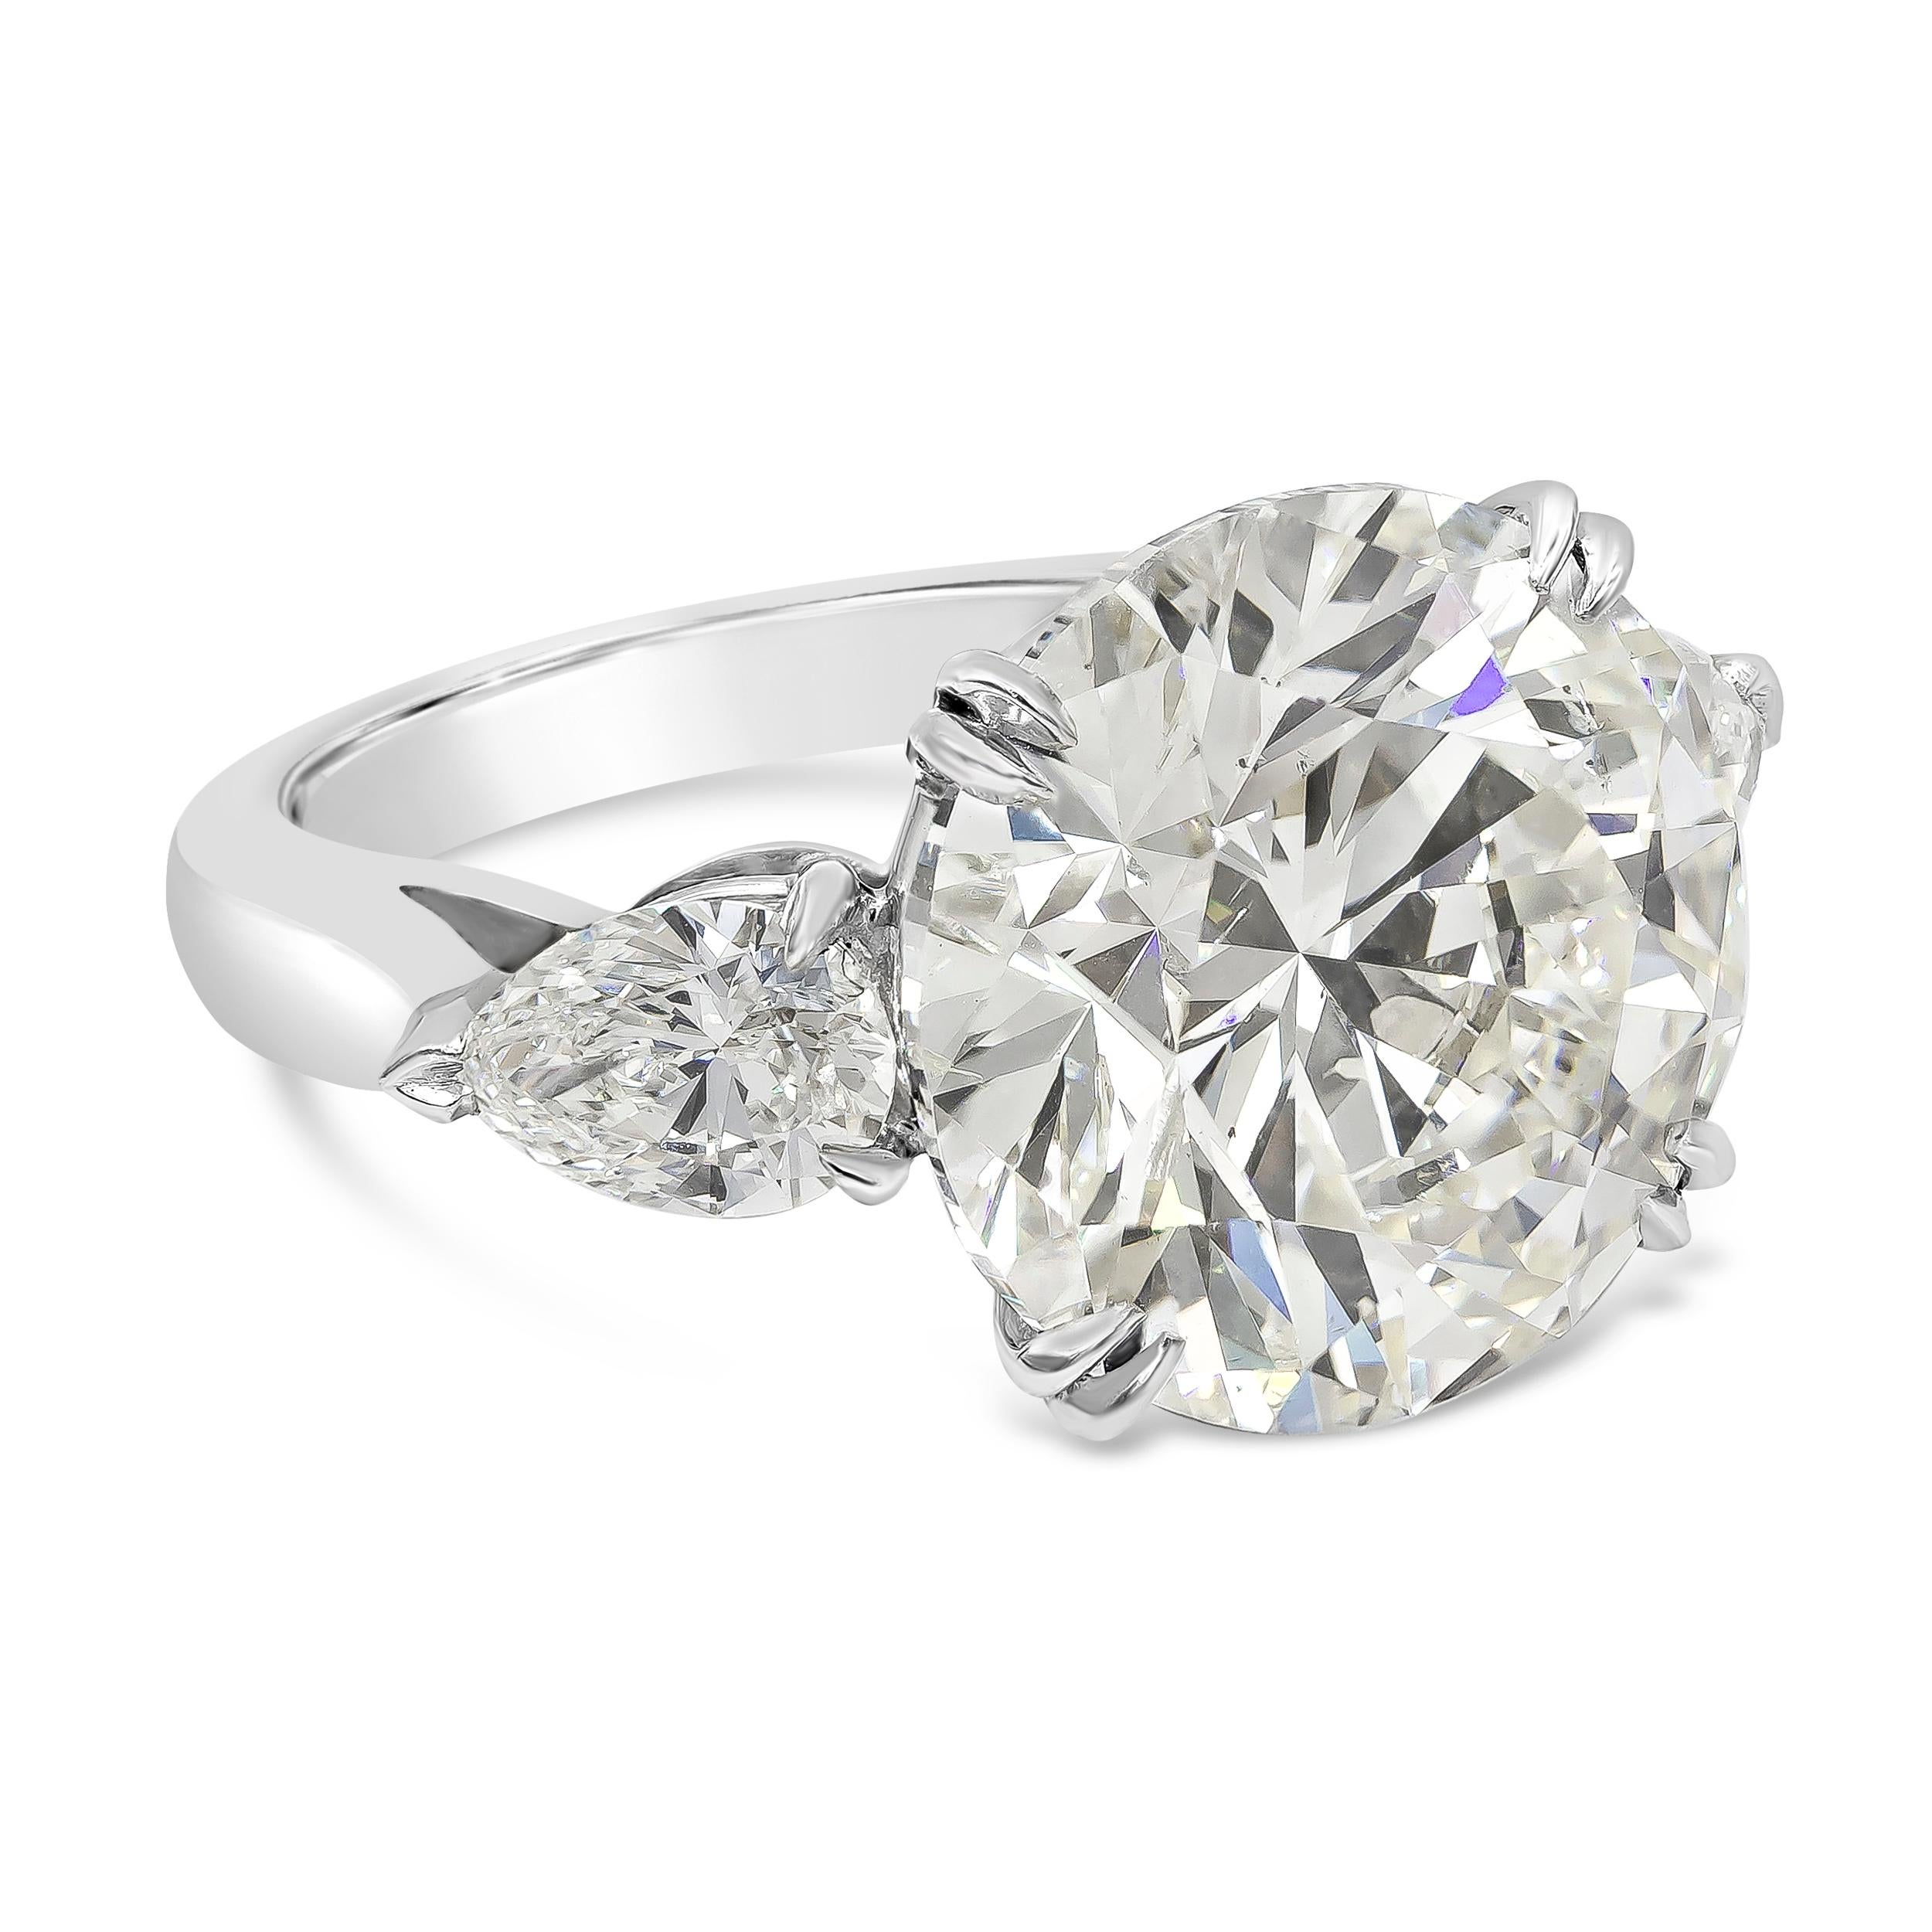 This gorgeous important engagement ring features a 10.09 carat brilliant round shape diamond GIA Certified as K color and SI2 in clarity, flanked by pear shape diamonds on each side weighing 1.22 carats total. Size 6.5 US and resizable upon request.